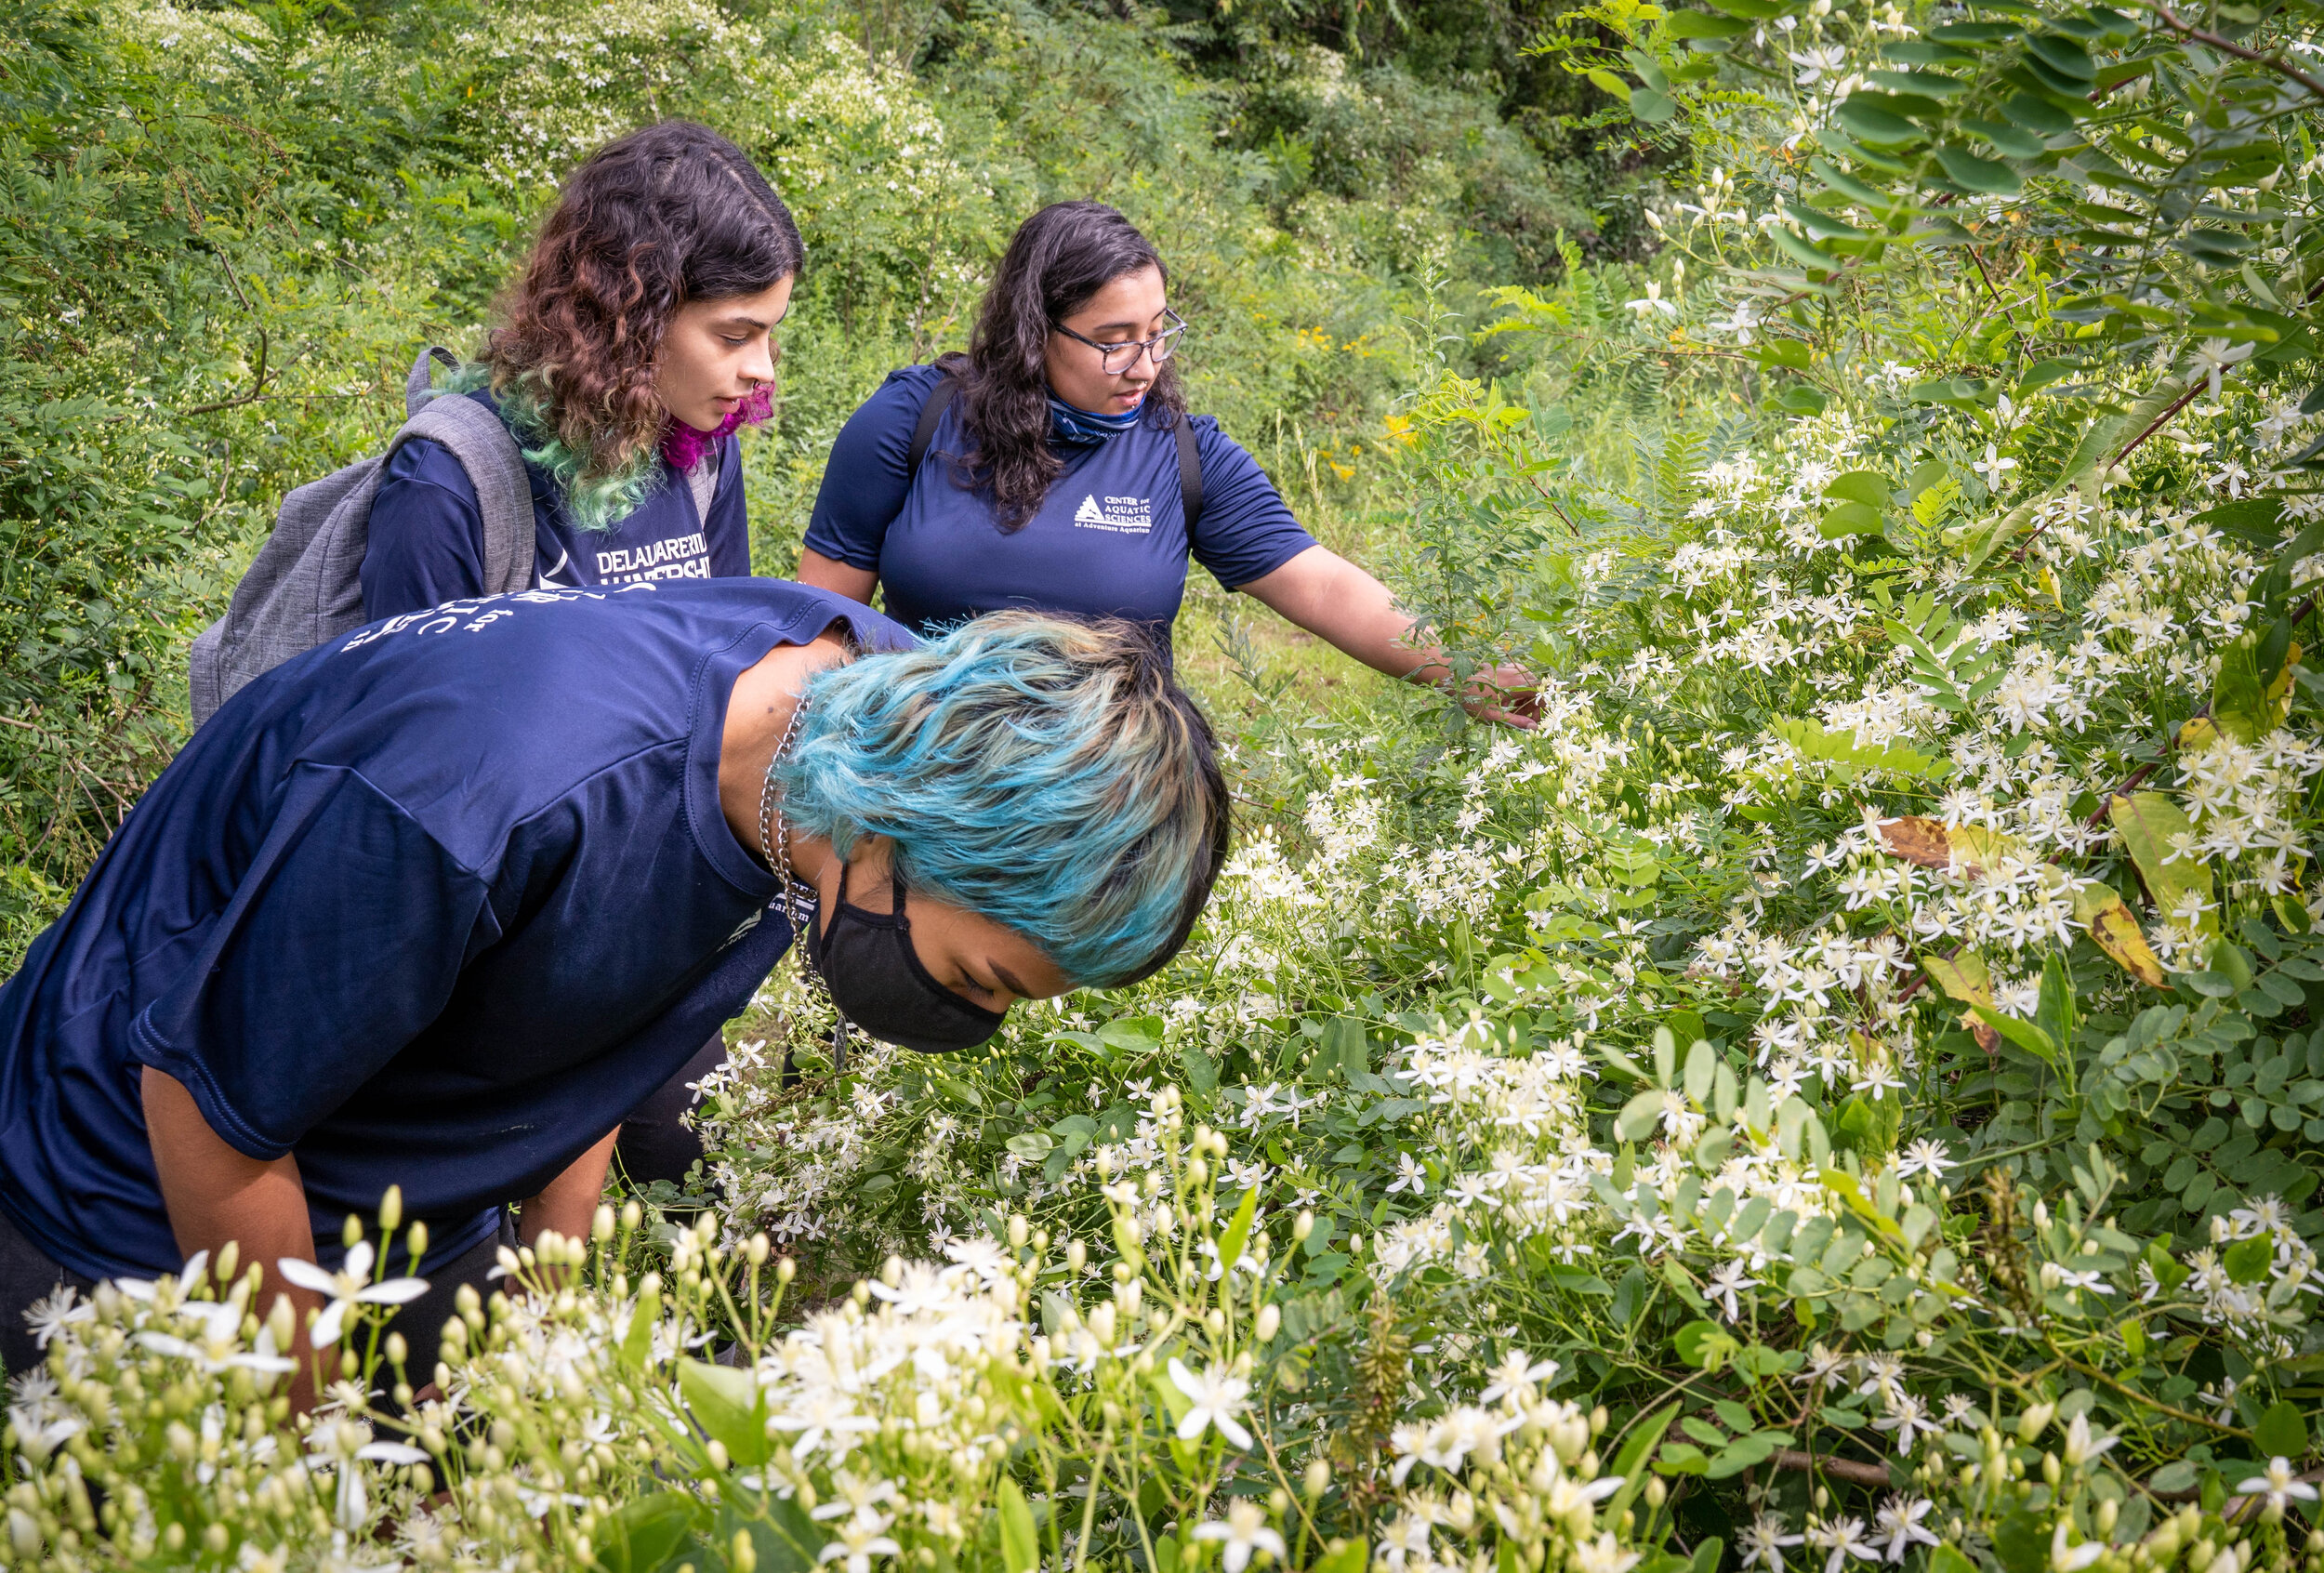 From front to back,Adriana Amador-Chacon,Priscilla Rios, and IvanaQuinones examine flowersinside the Cramer Hill Nature Preserve.